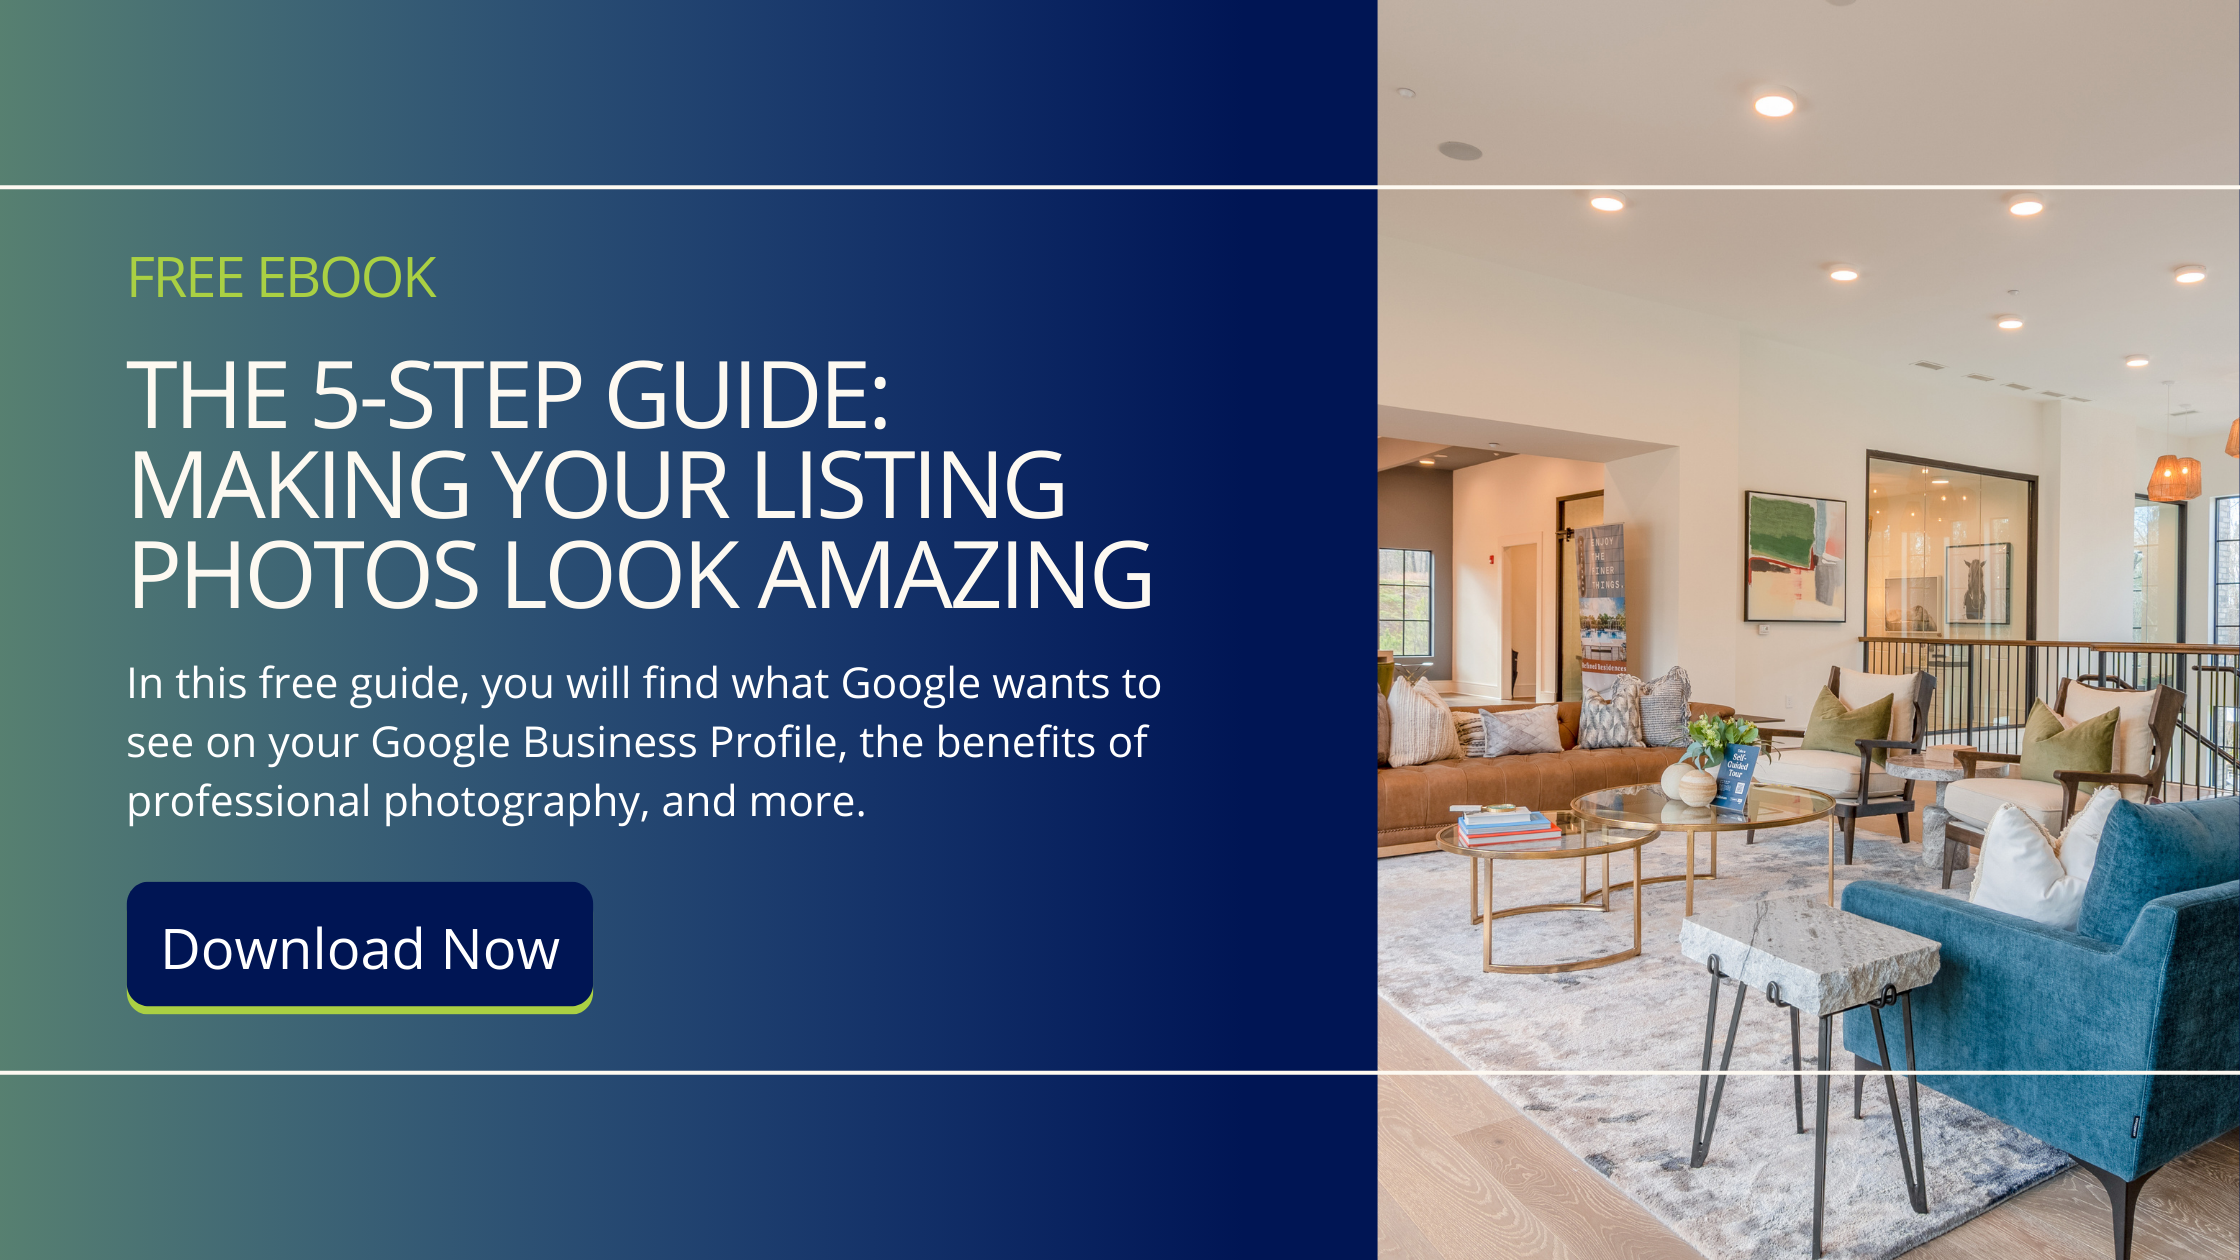 The 5-Step Guide - Making Your Listing Photos Look Amazing